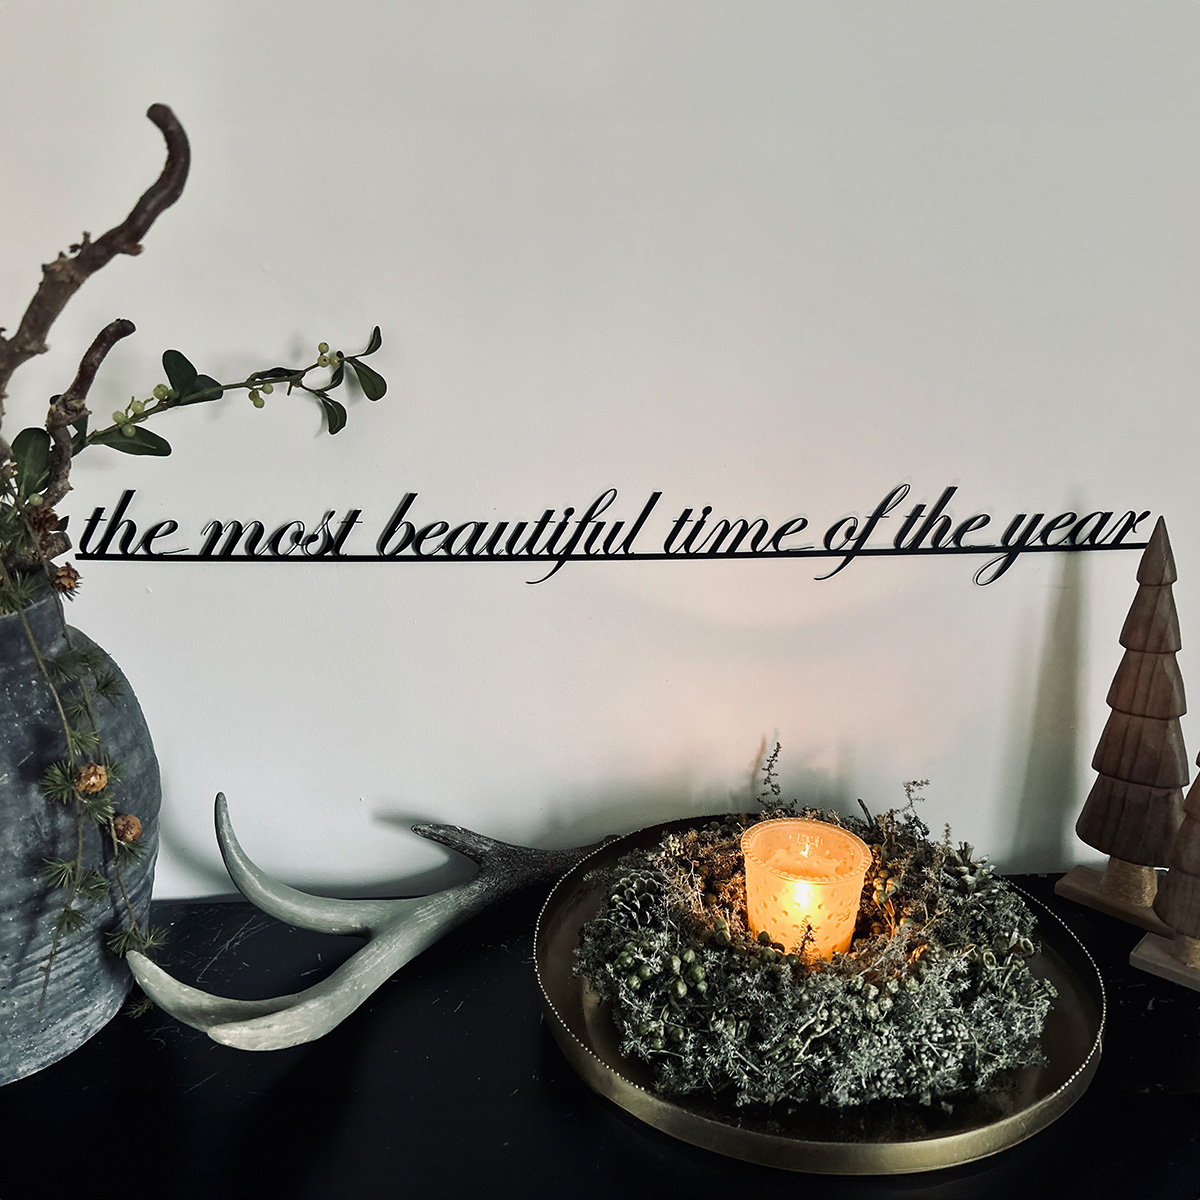 Schriftzug Metall "The most beautiful time of the year"